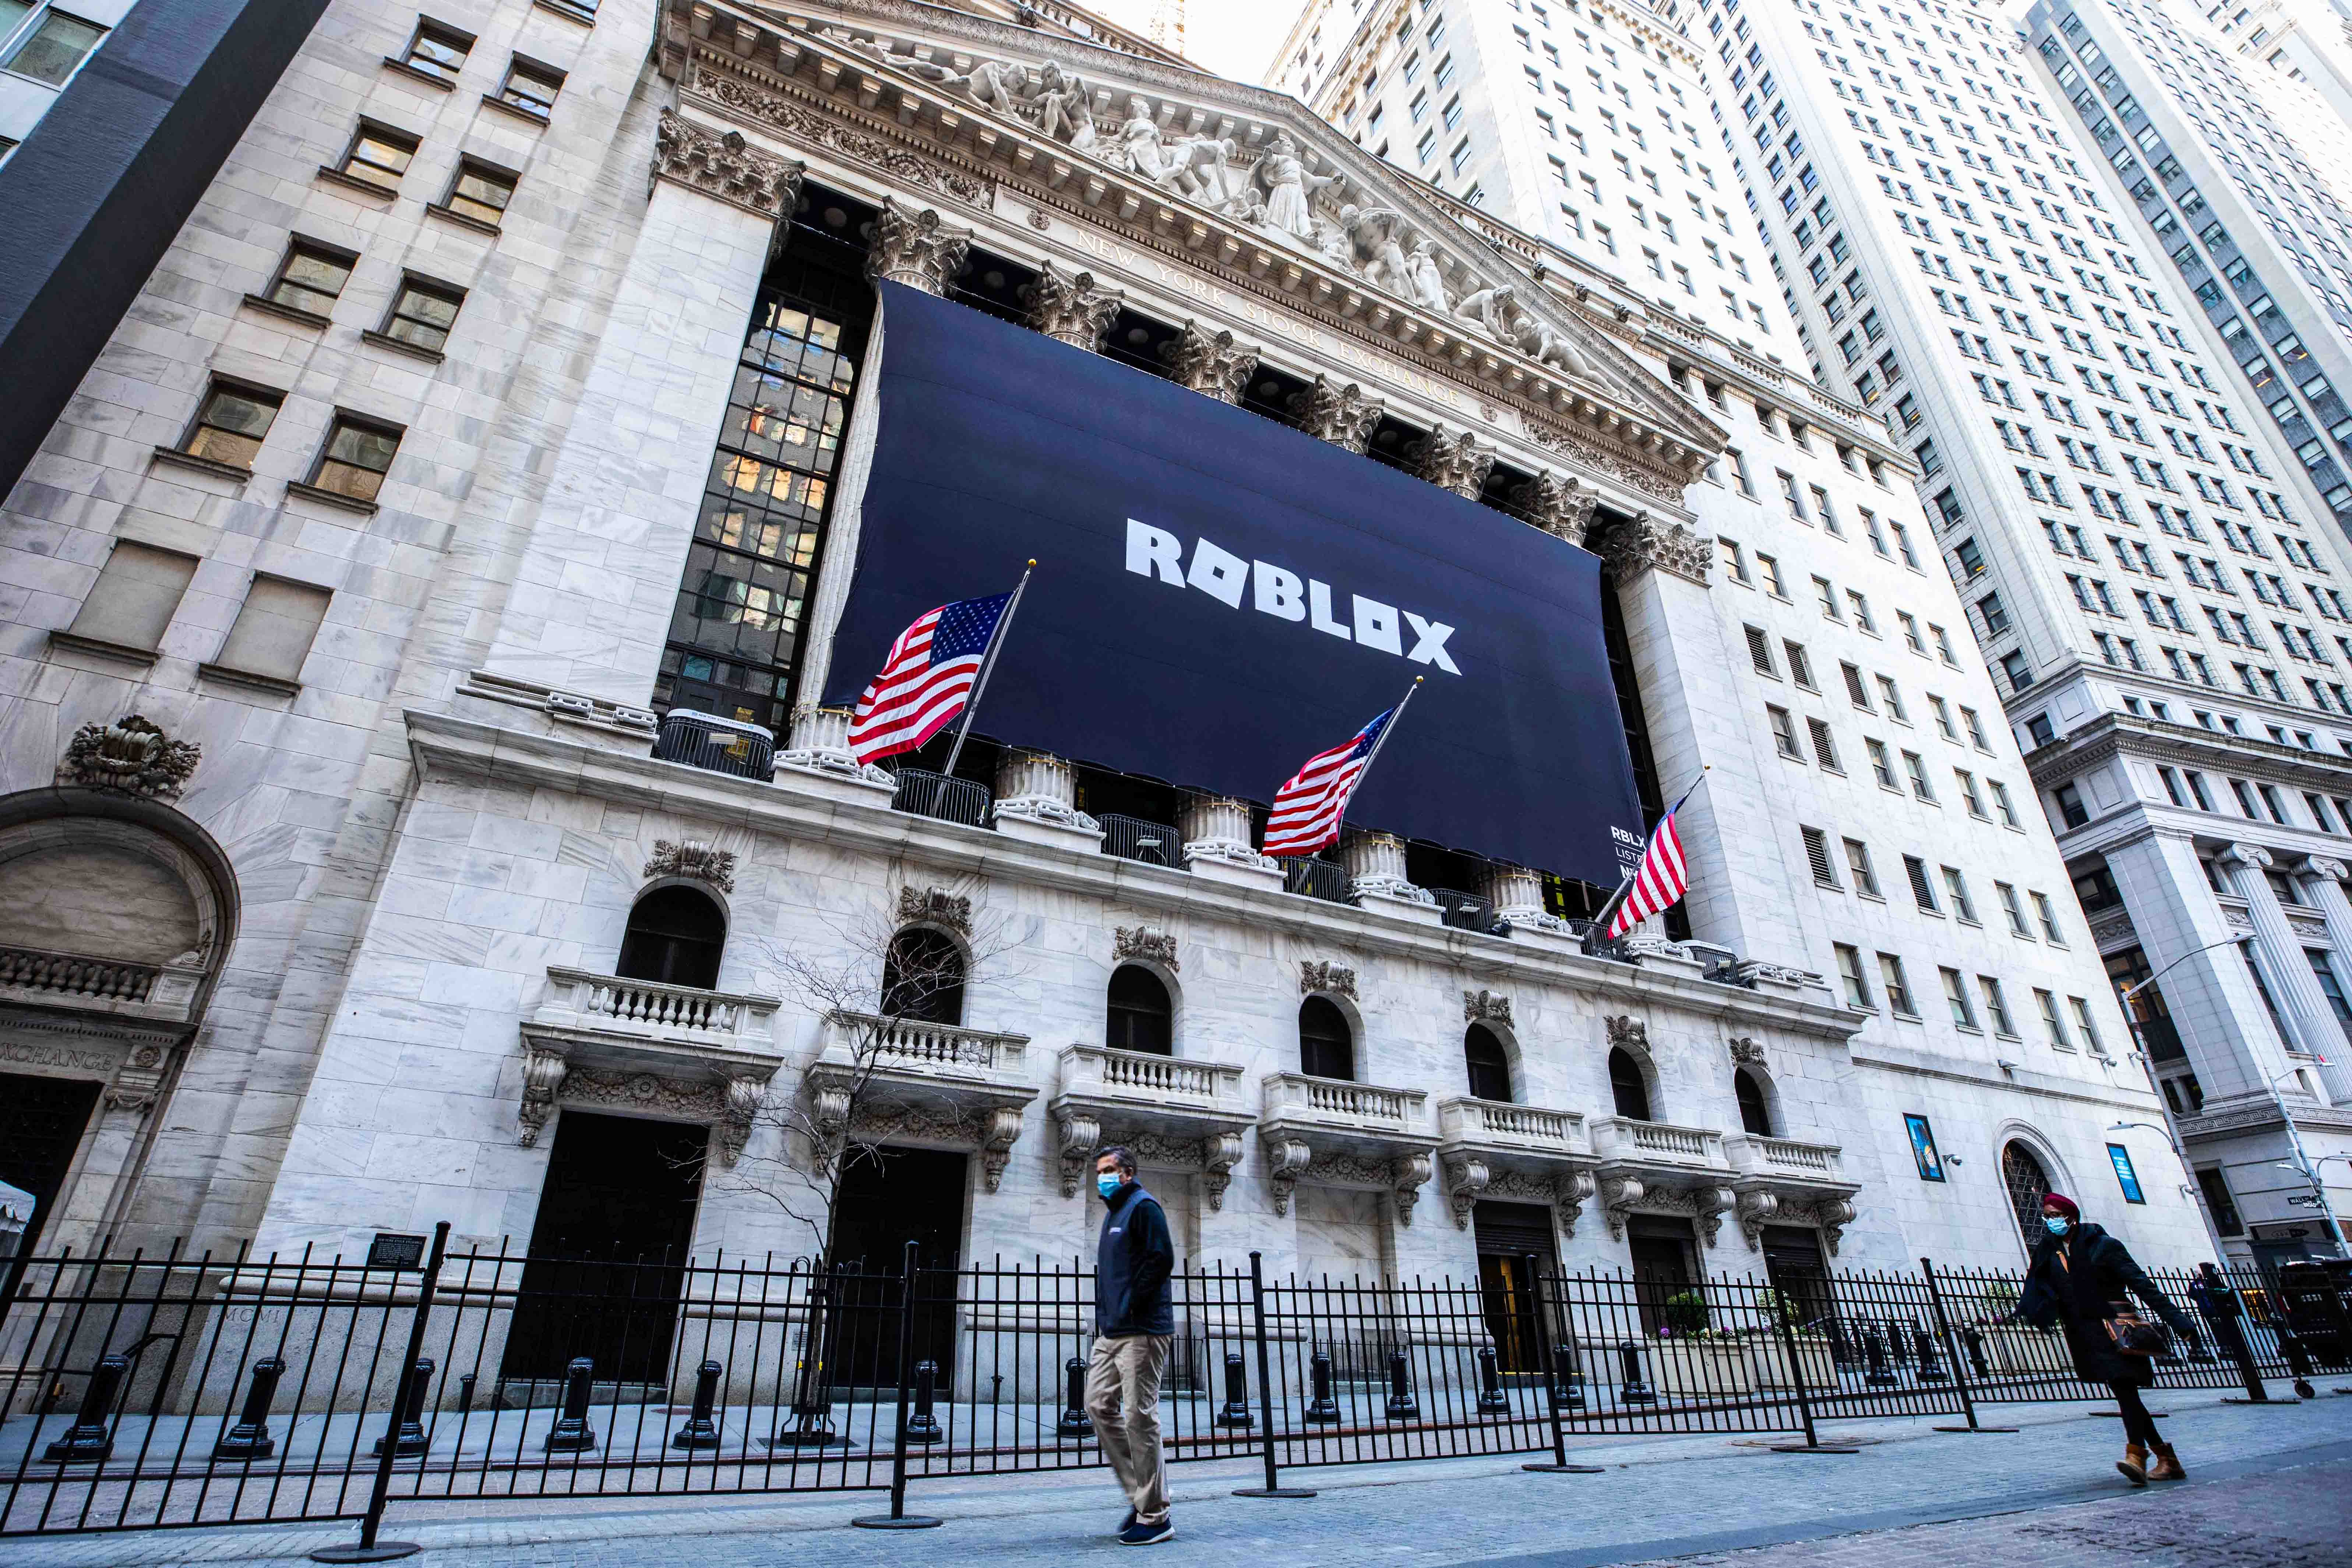 Why did Roblox Corp. (RBLX) Stock Fall By 21% After Earnings?